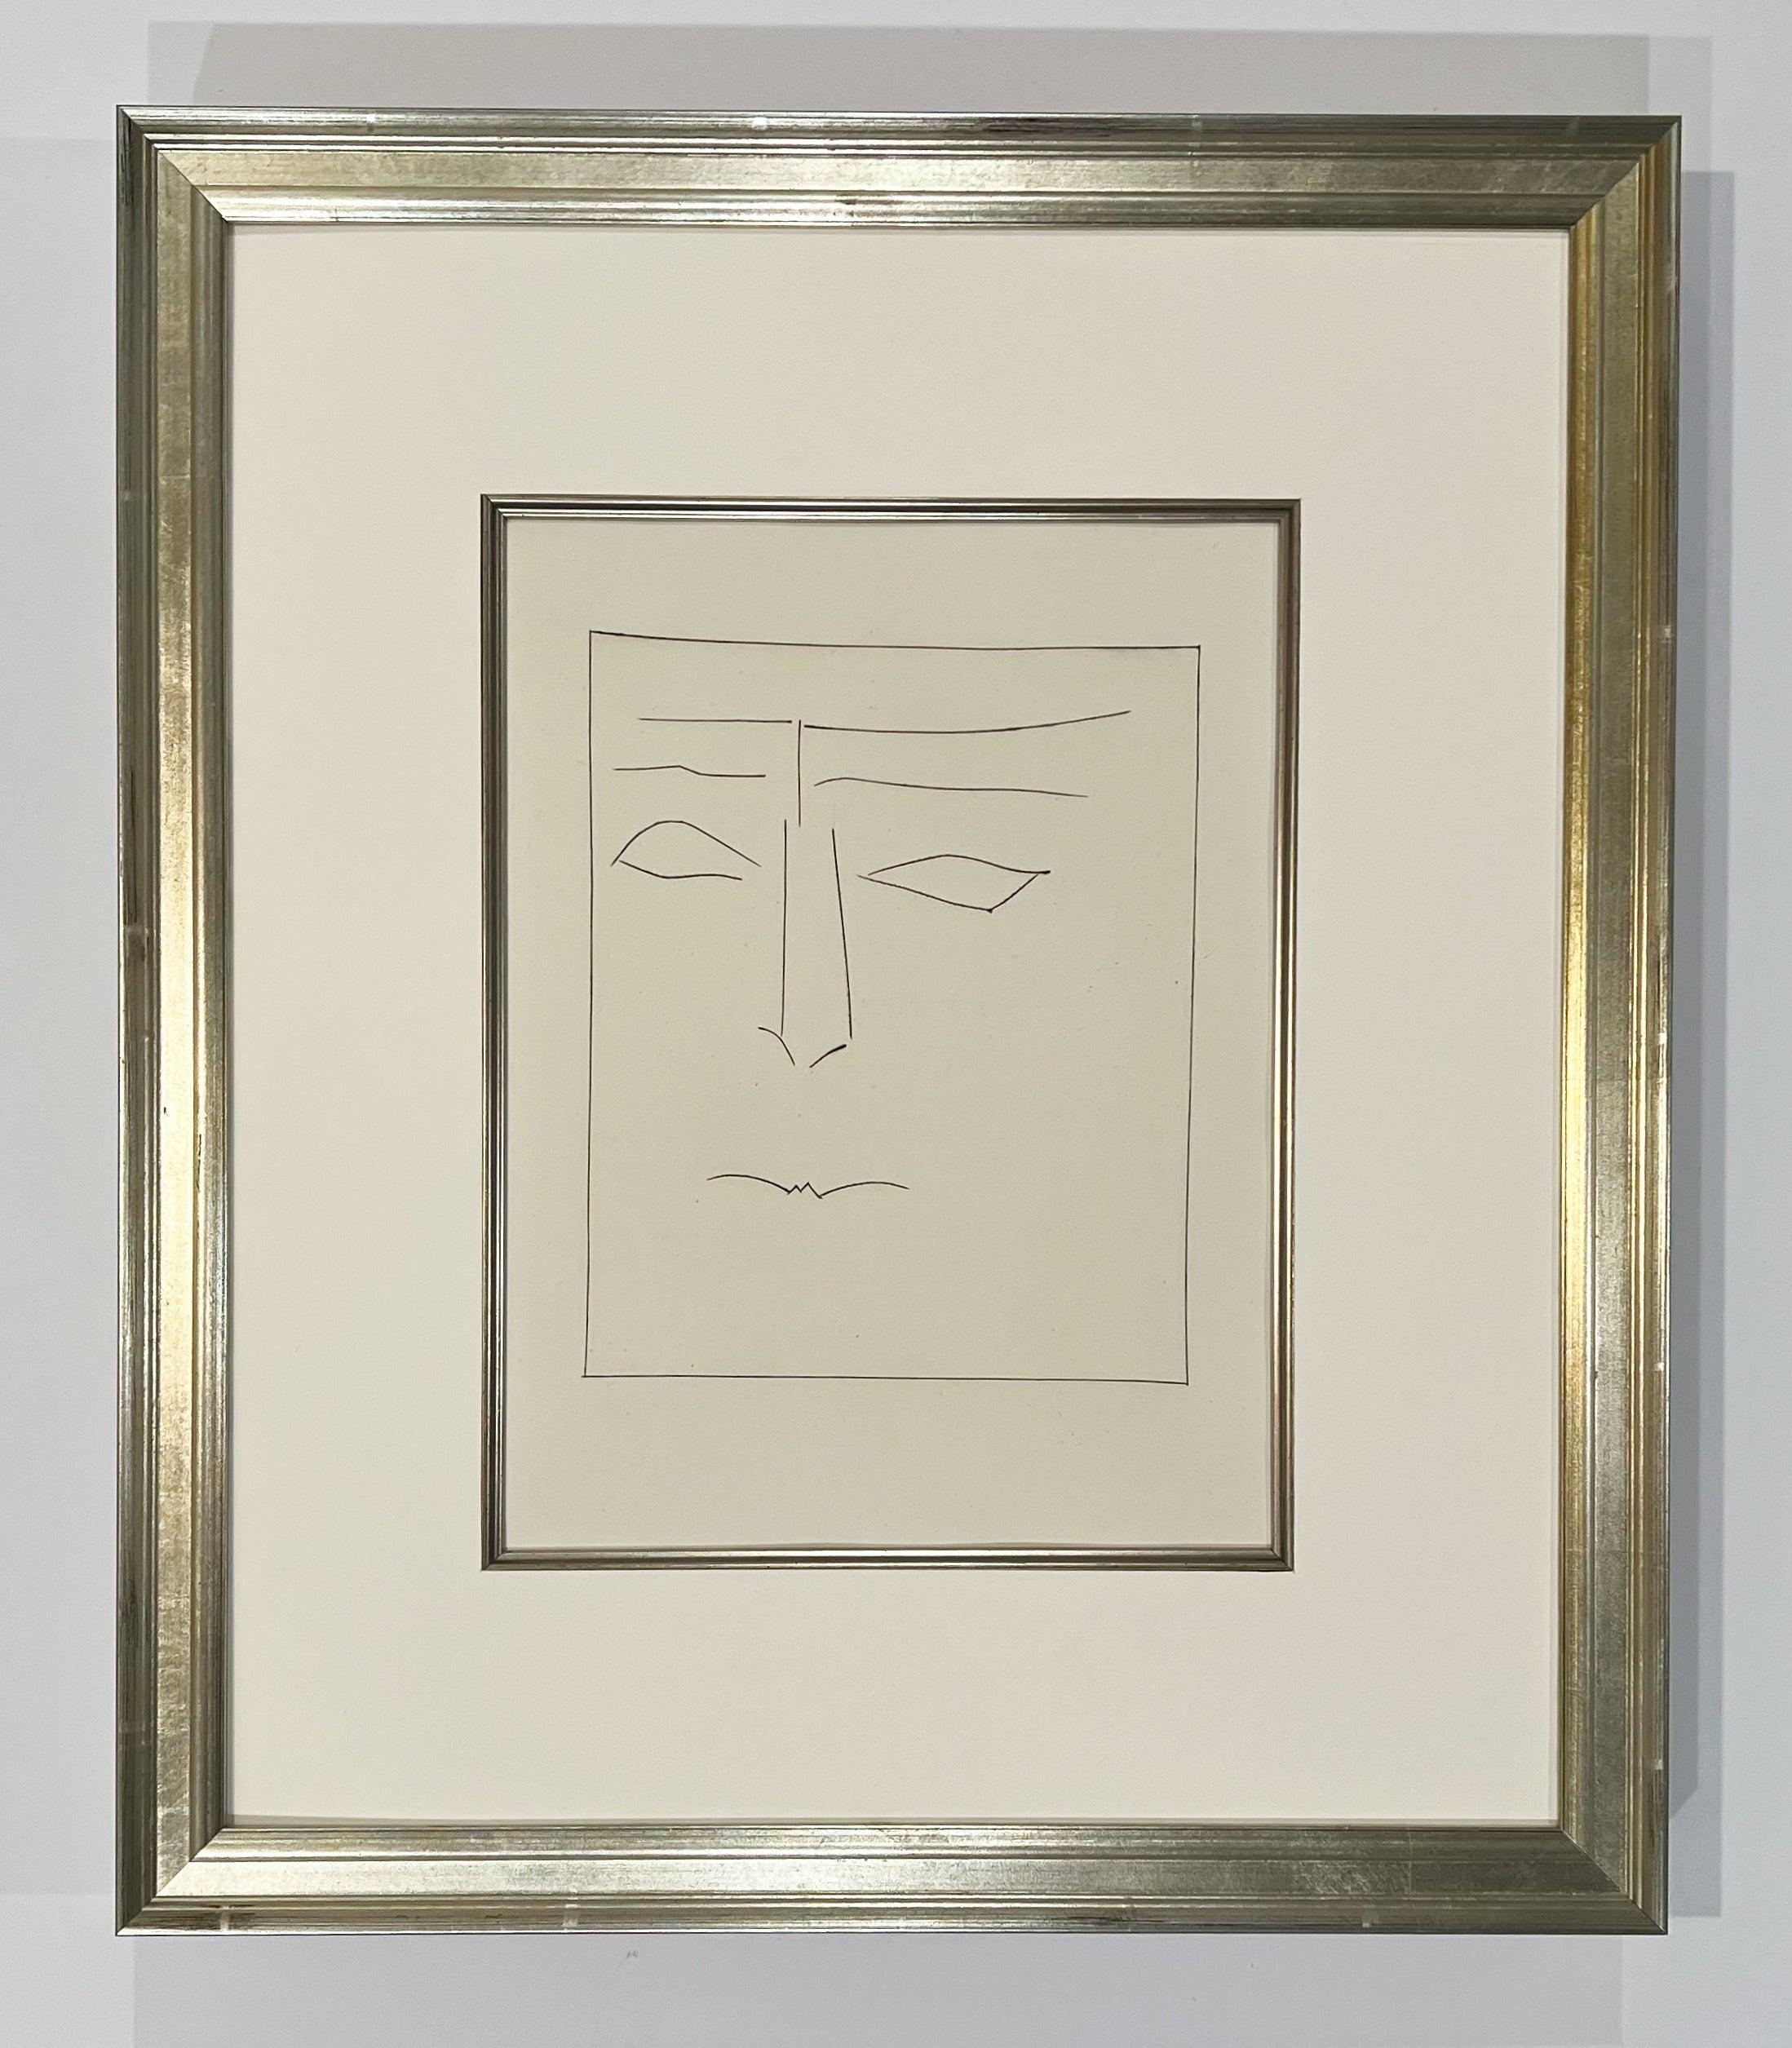 Square Head of a Man with Clenched Mouth (Plate IX), from Carmen - Print by Pablo Picasso